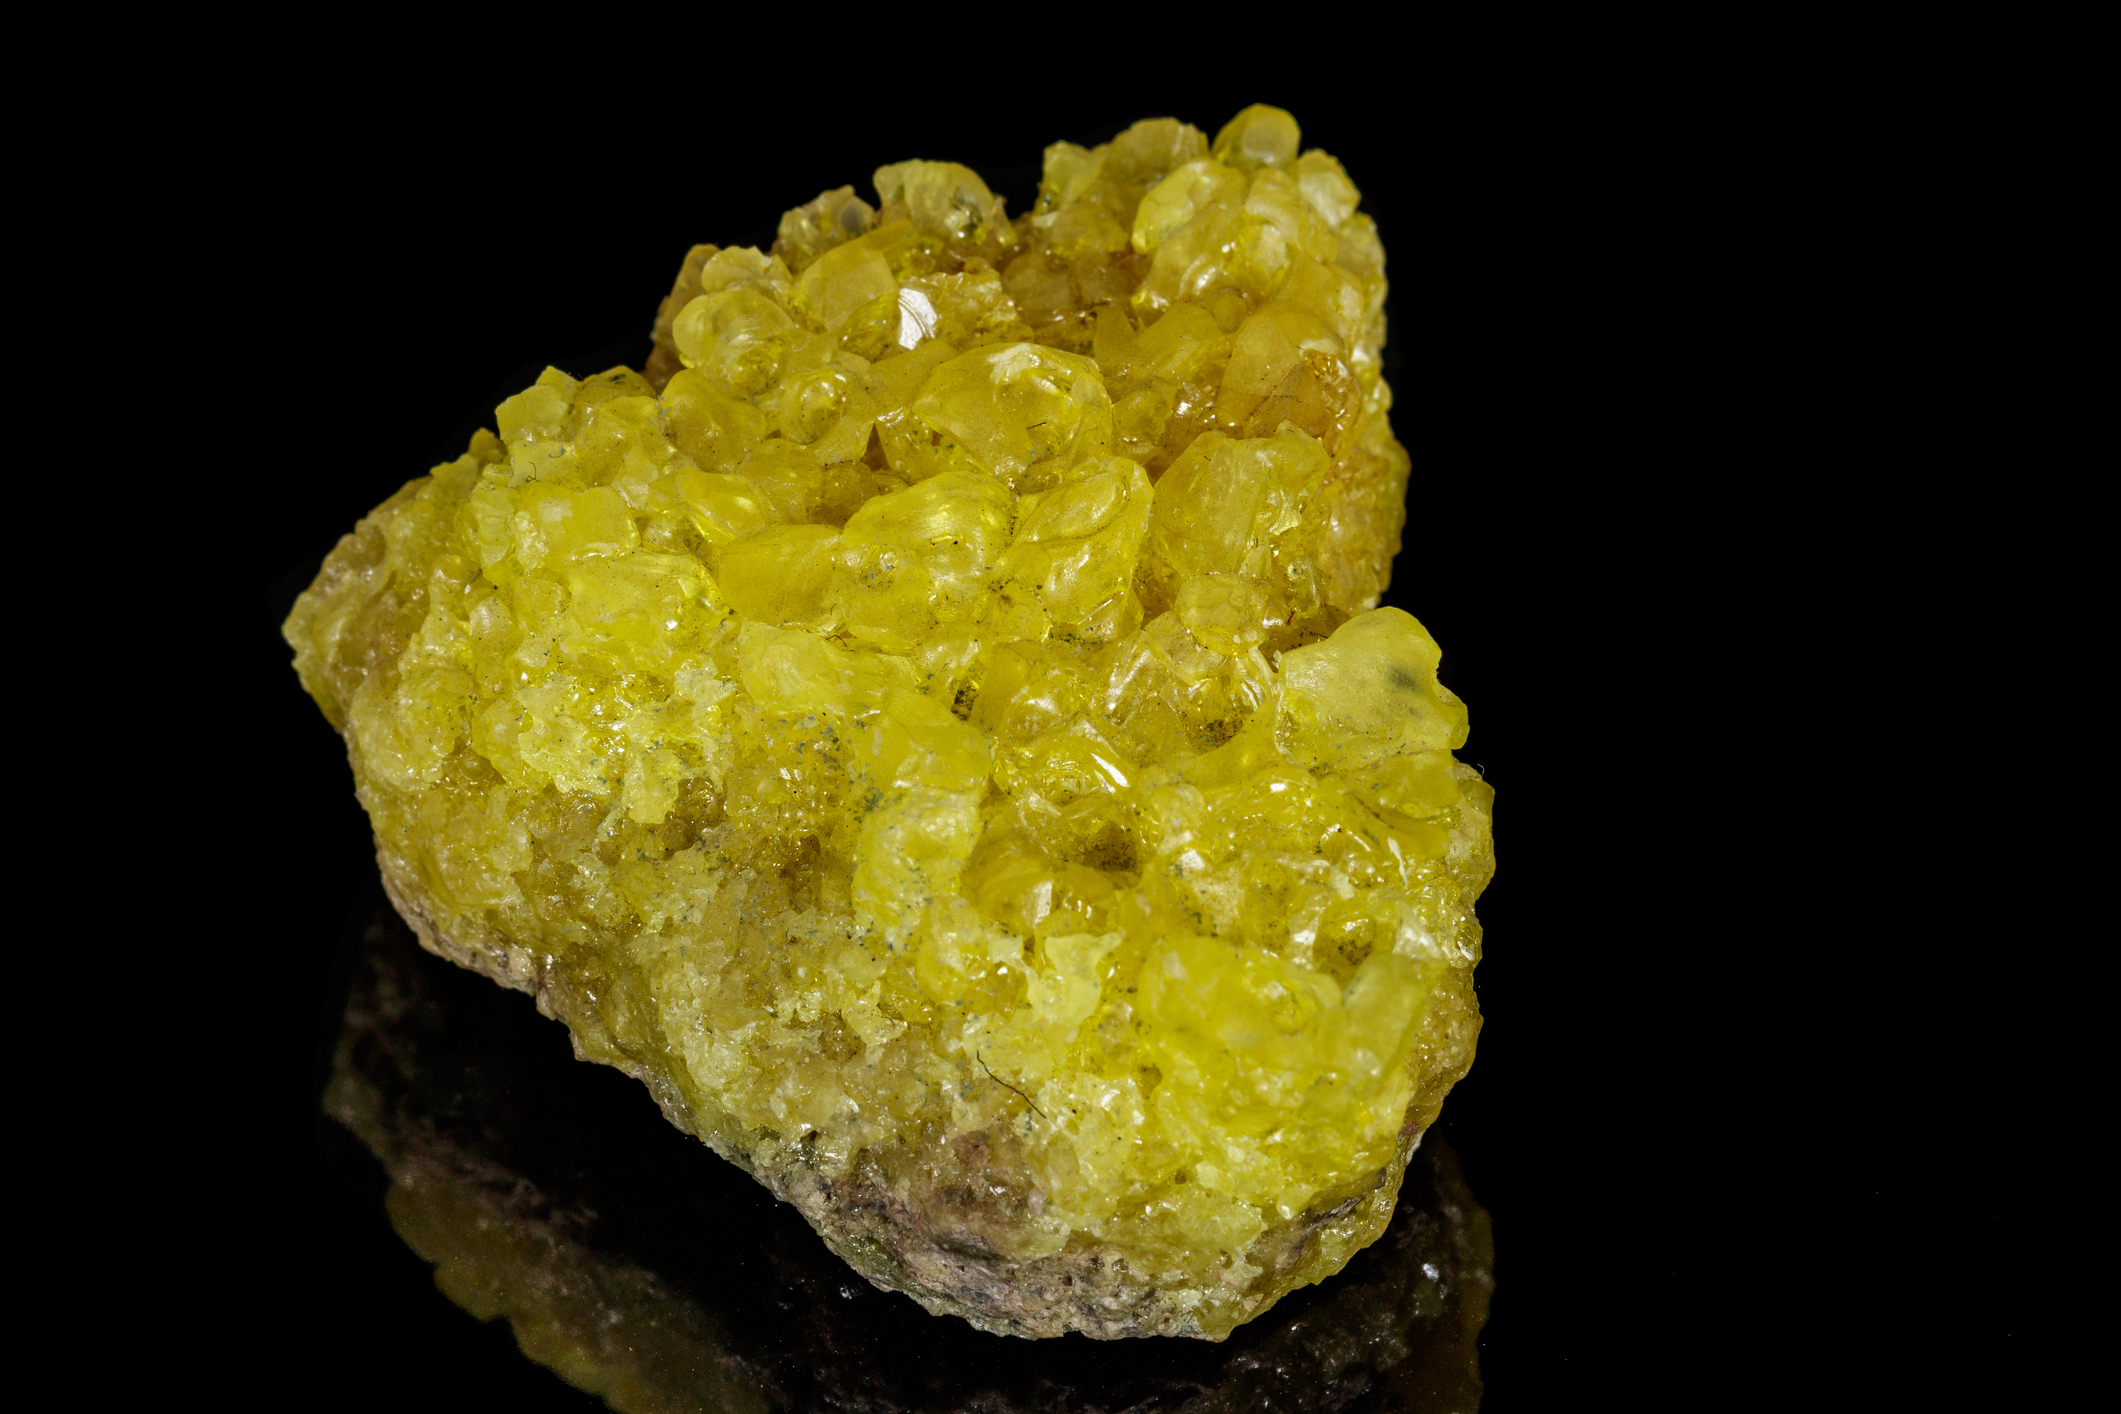 Sulphur occurs in nature mainly in the form of sulphide or sulphate minerals.